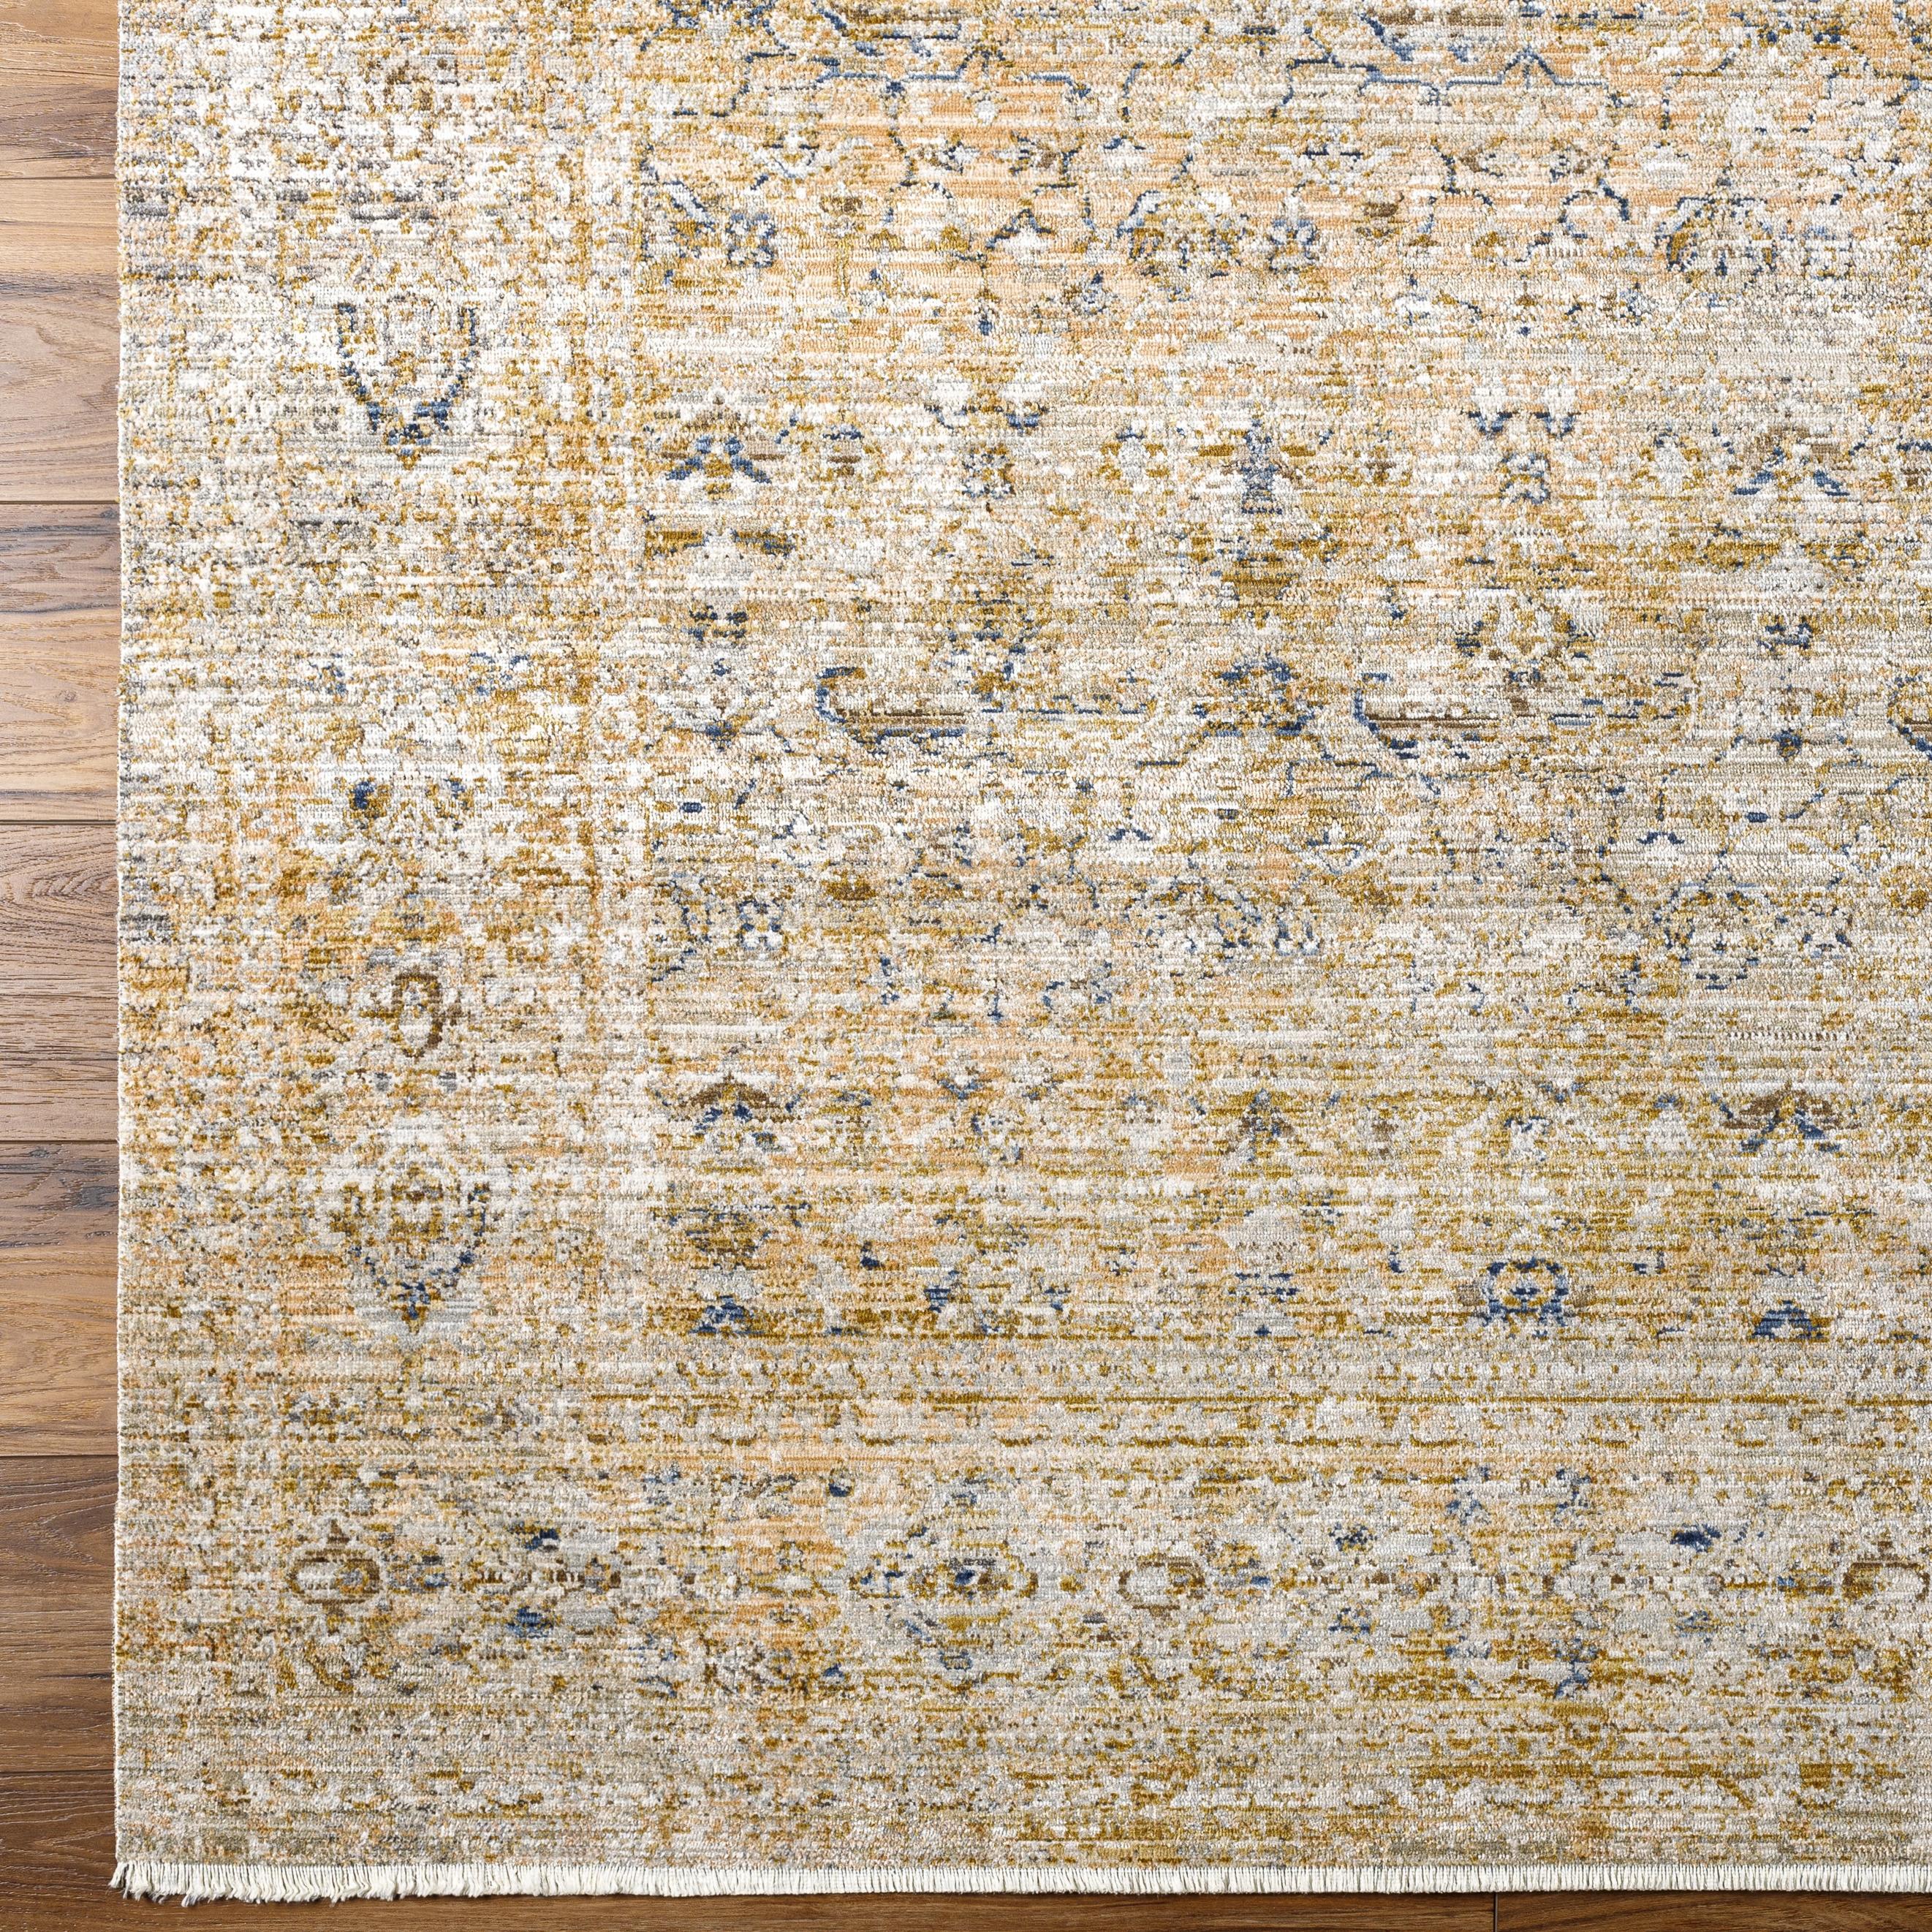 The Margaret area rug is a truly special collection from our Becki Owens x Surya line. A beautiful addition to any room, the Margaret area rug features a unique combination of warm neutrals and navy details. Amethyst Home provides interior design, new home construction design consulting, vintage area rugs, and lighting in the Miami metro area.